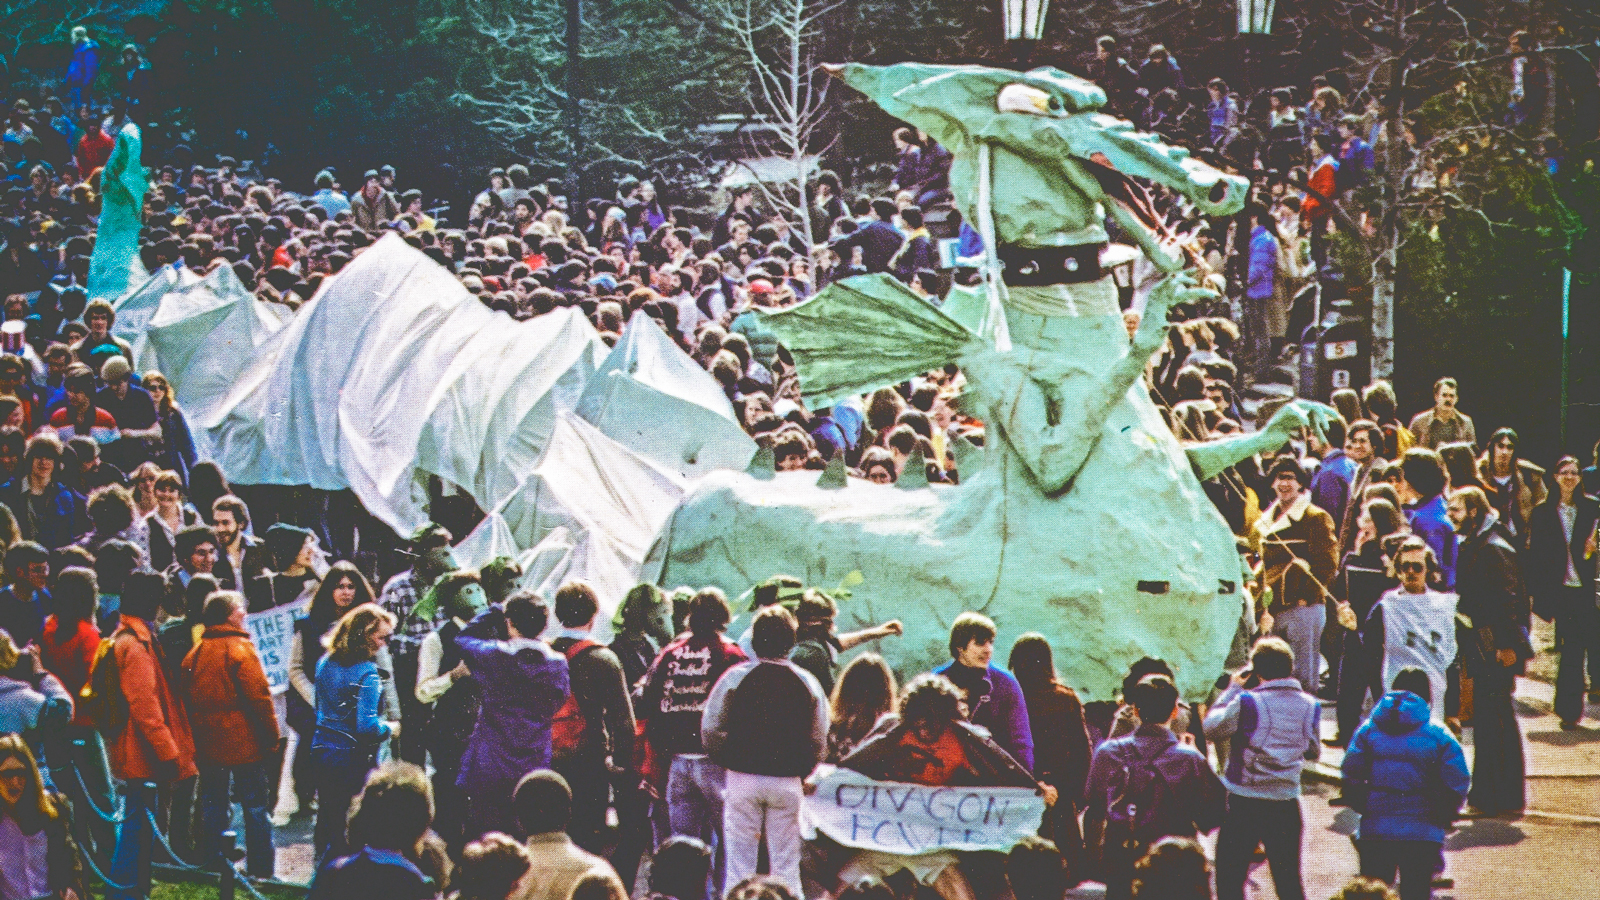 The 1979 dragon is shown surrounded by crowds during the parade